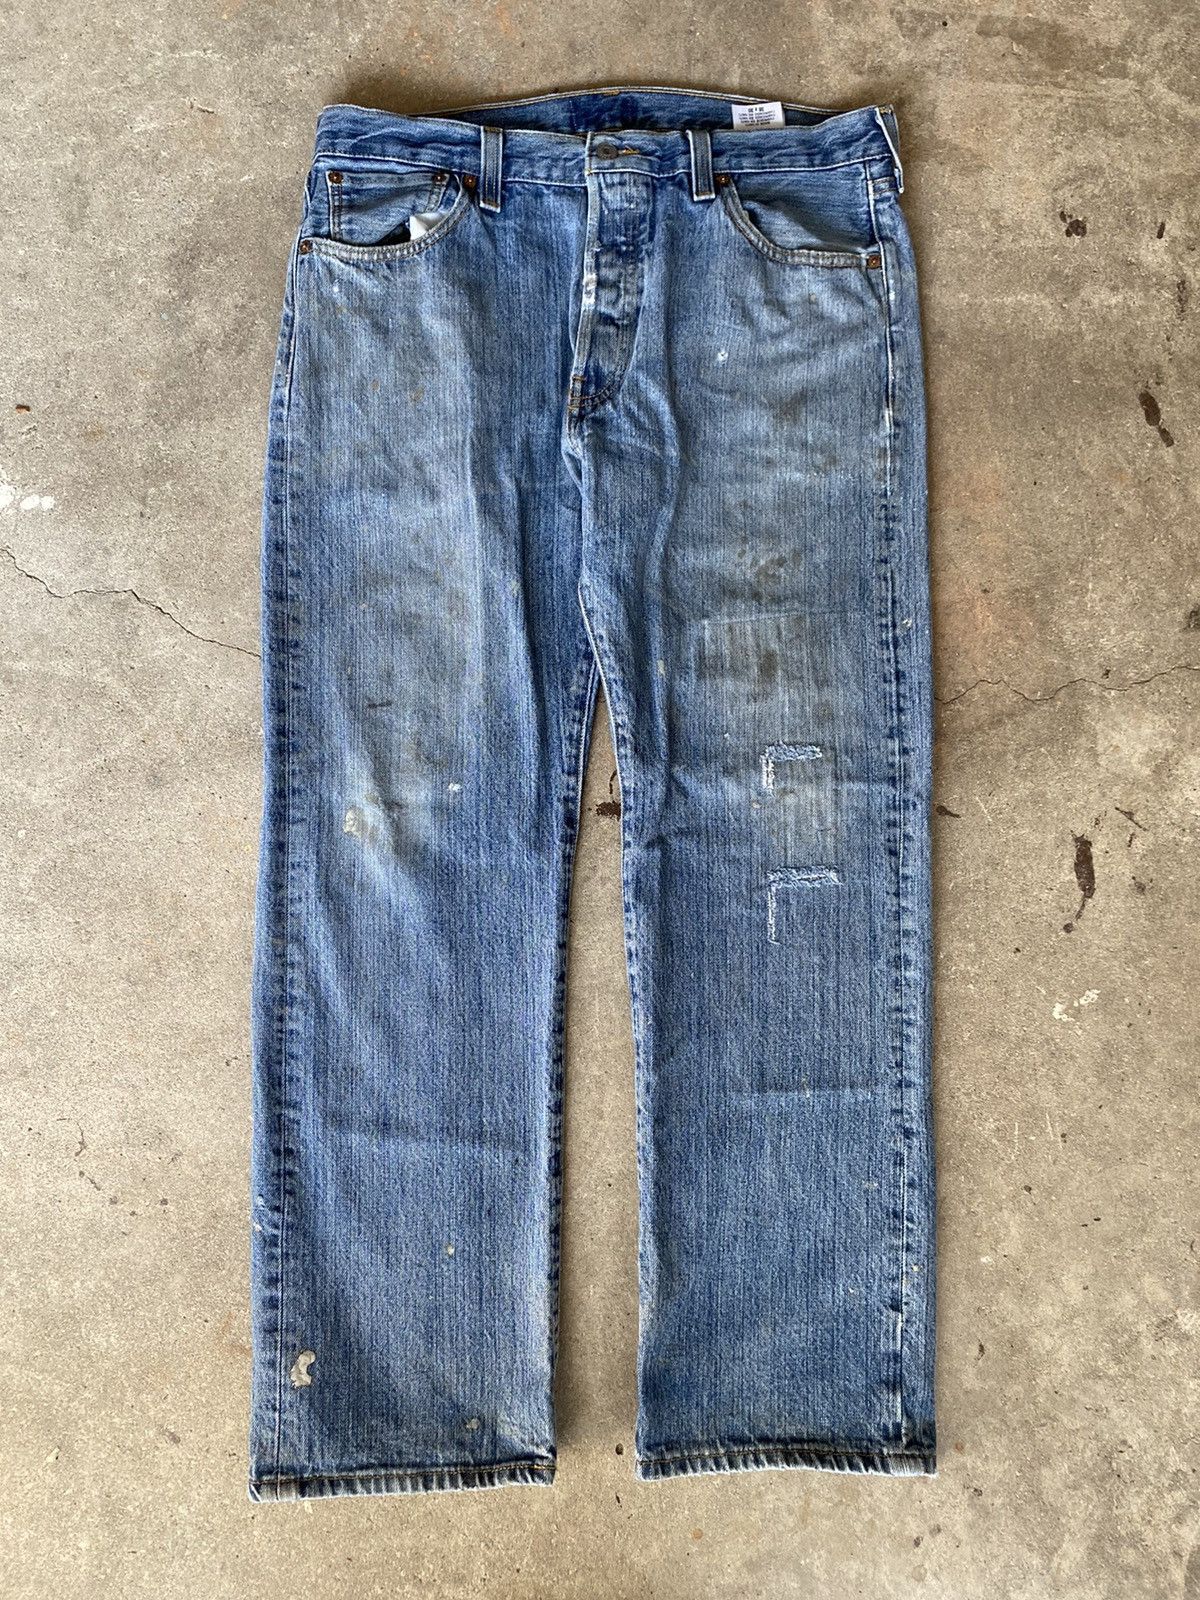 Vintage Vintage Repaired & Painted Levi’s 501 Jeans | Grailed